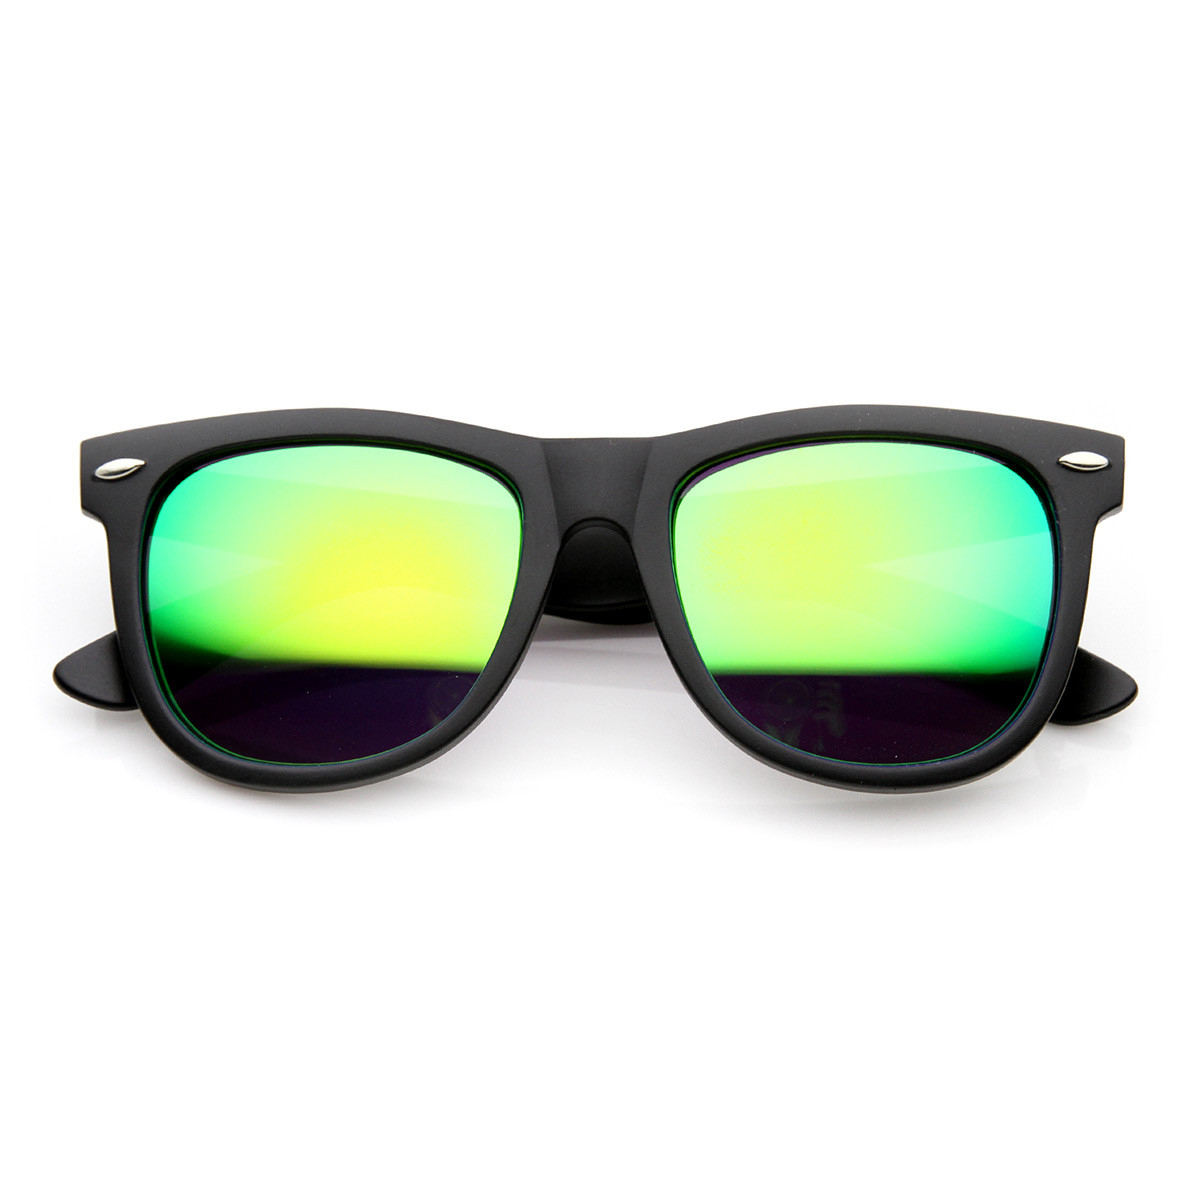 Oversized Horn Rimmed Sunglasses With Metal Rivets - Black Green